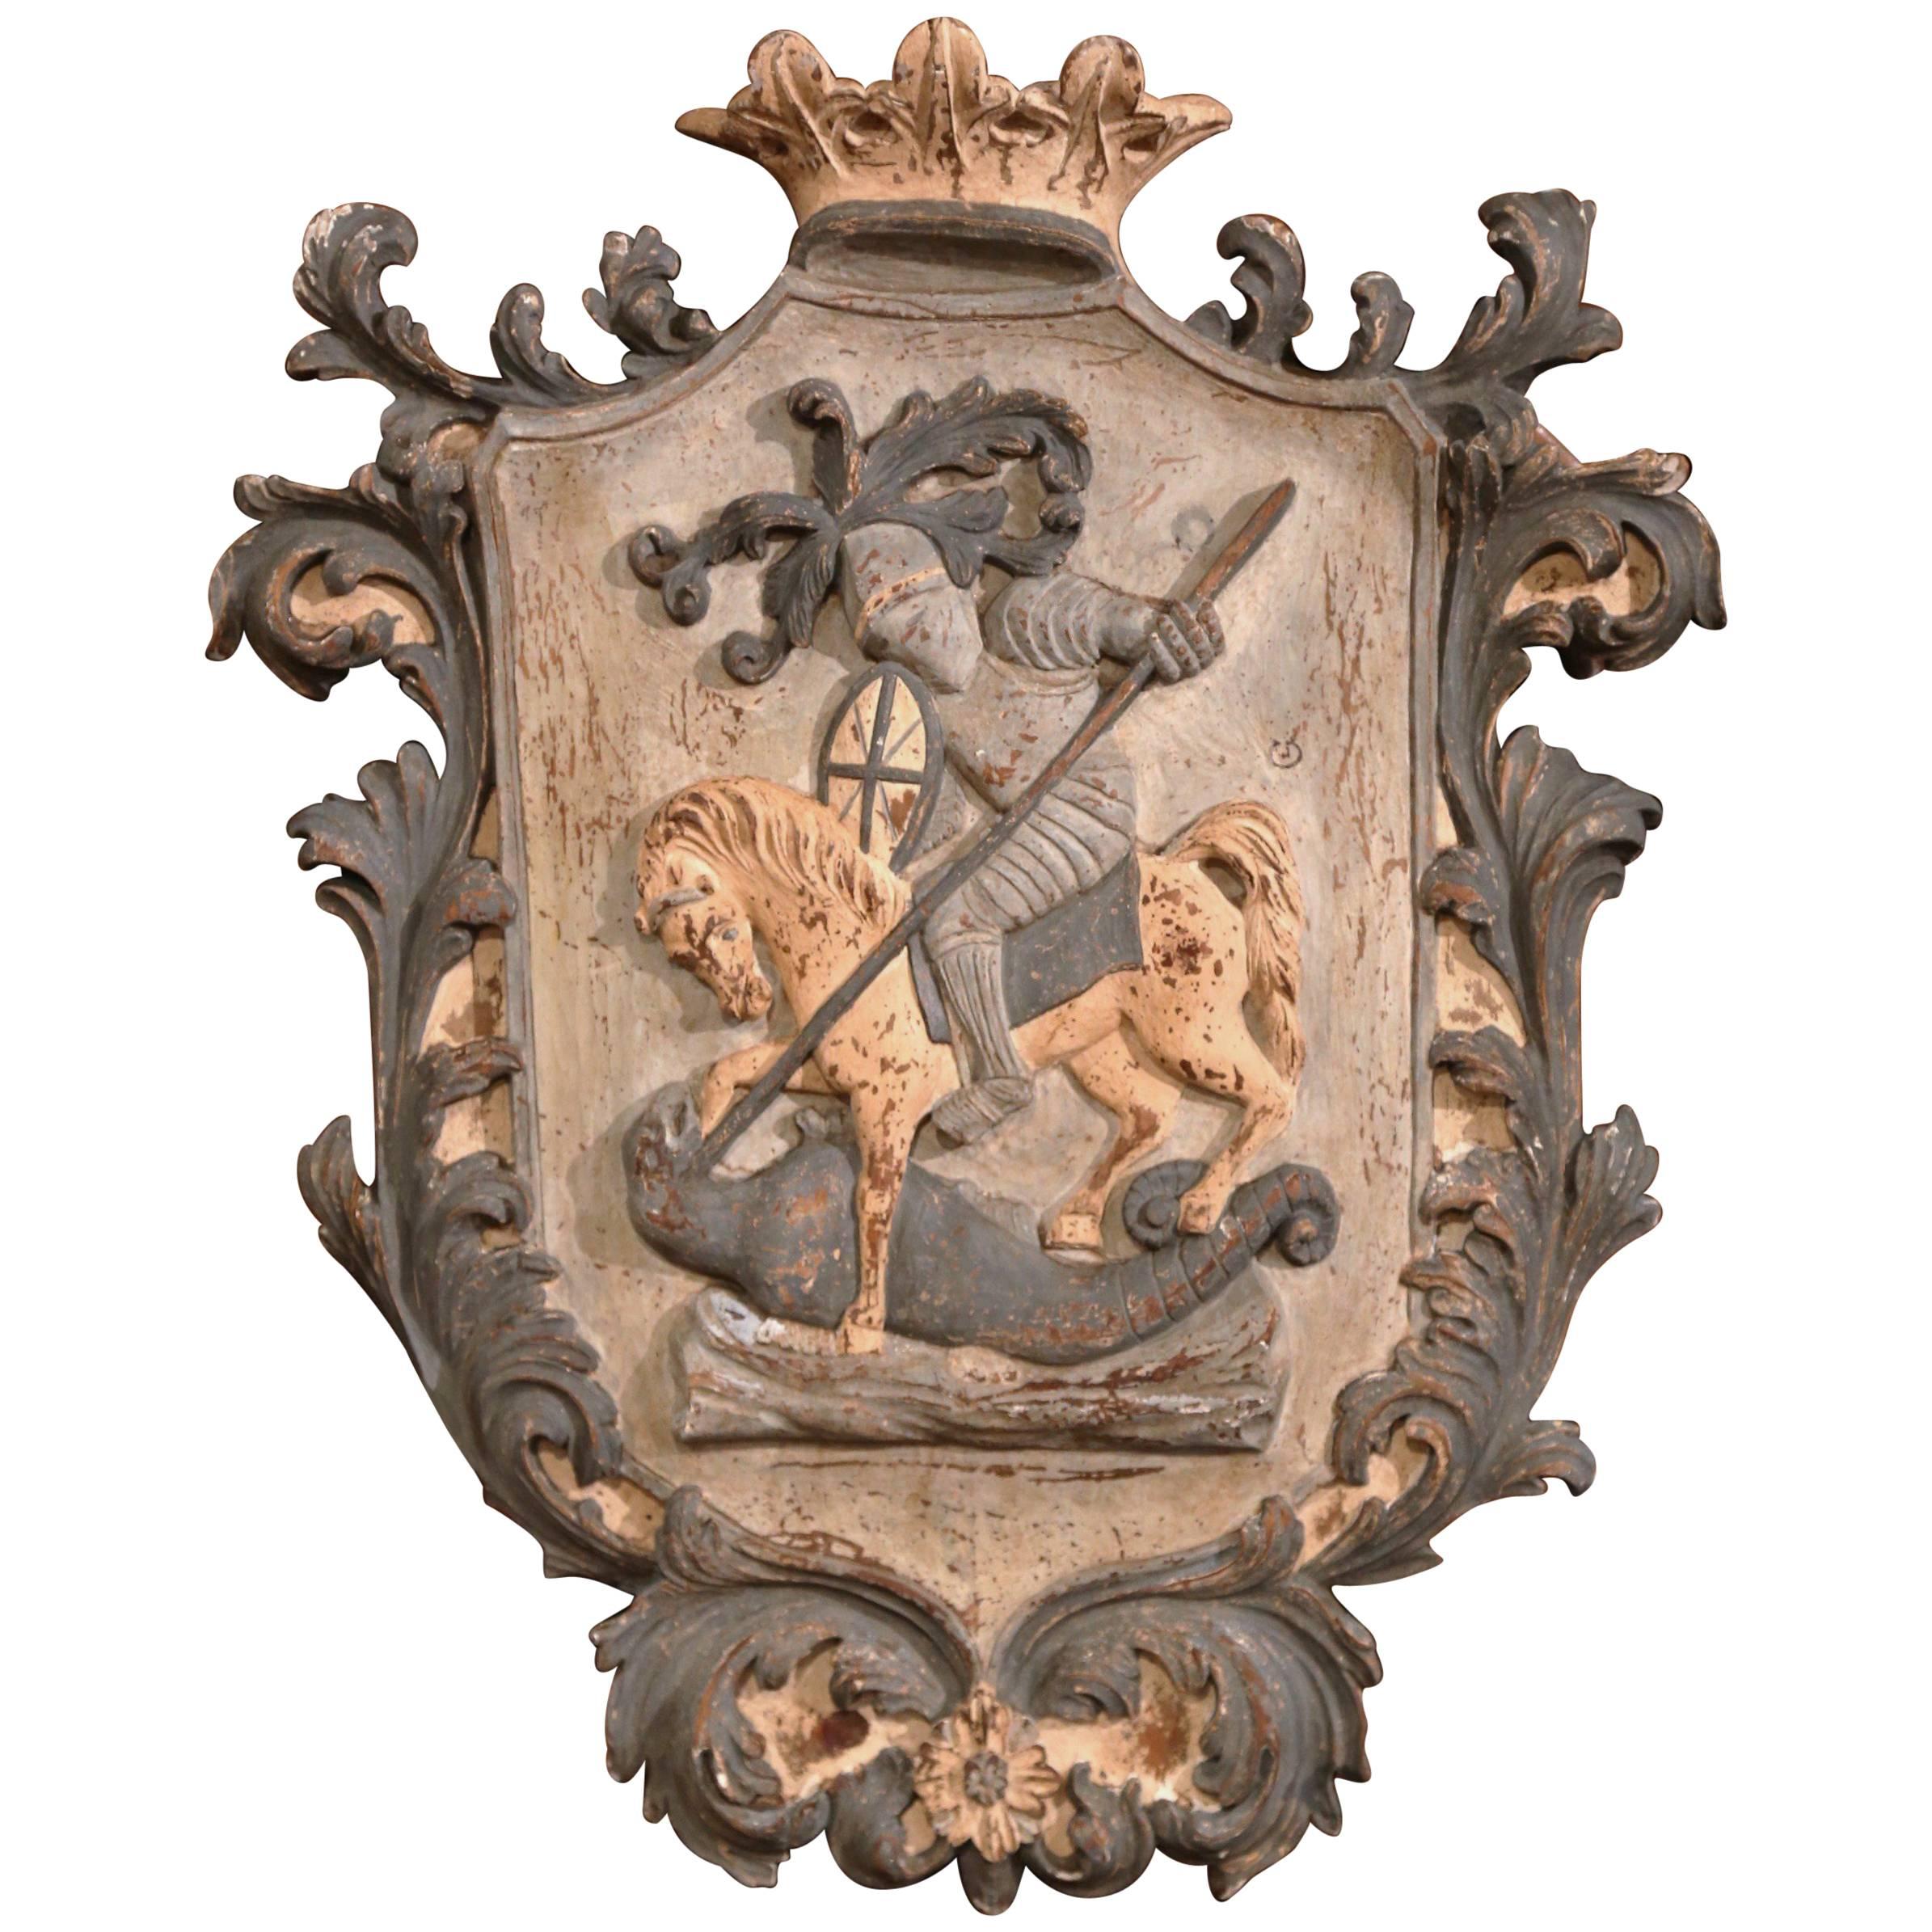 Early 20th Century French Carved Painted Wall Hanging Crest with Armored Soldier